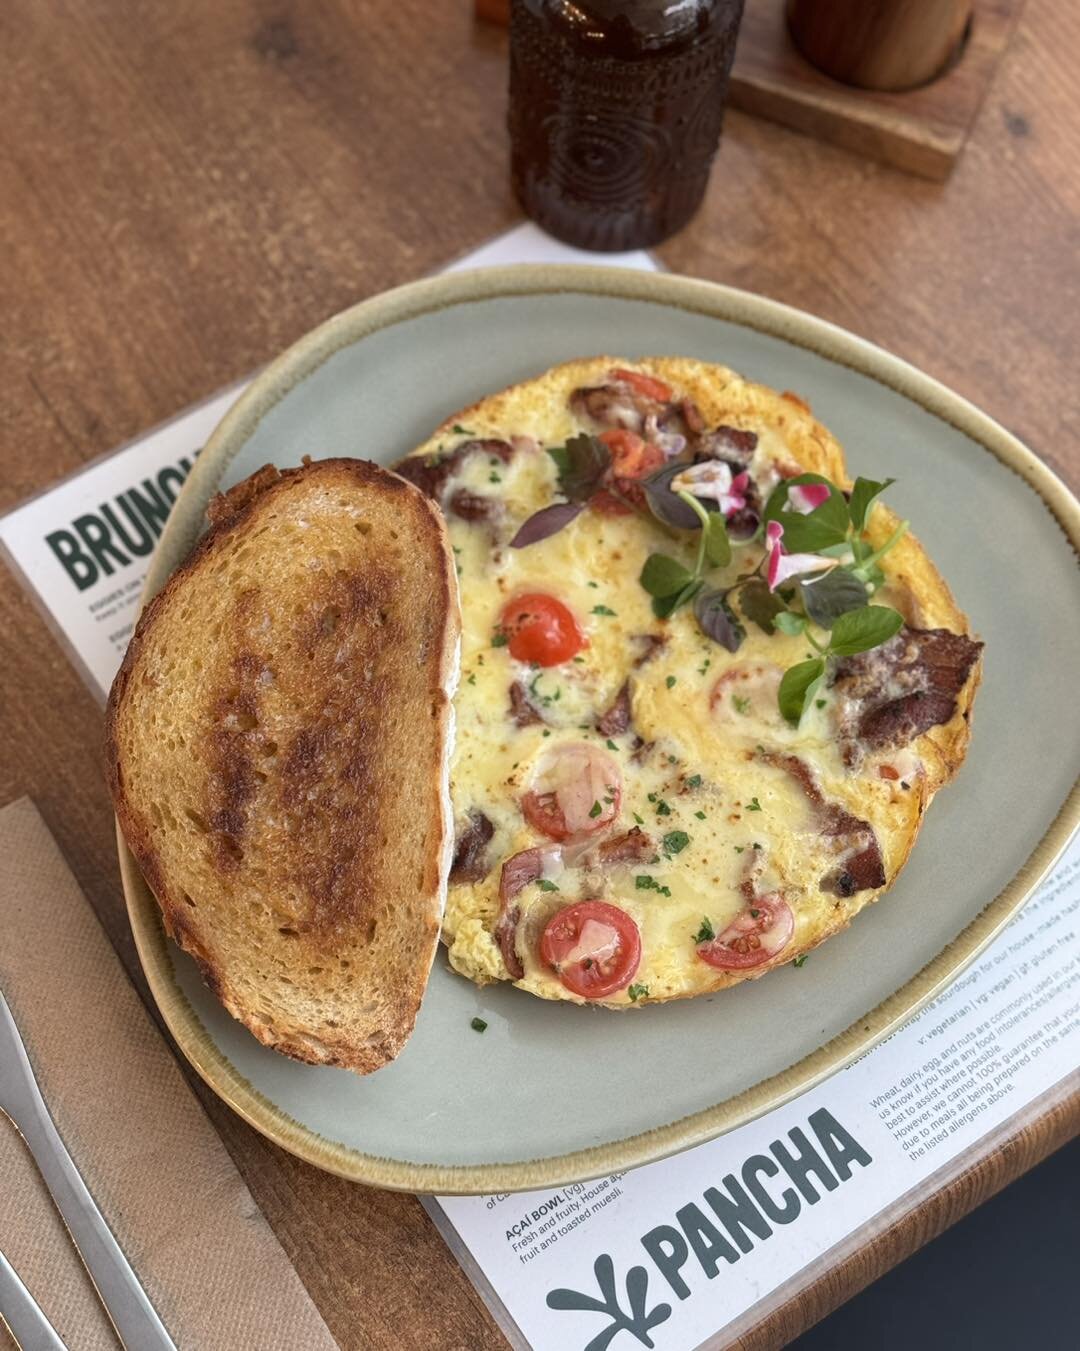 Truely Eggsquisite 😜 Baked, fluffy, cheesy omelette with two fillings of your choice 🙌
This one was crispy bacon and tomato 🥓 🍅 
Available all day from 6am-2pm, have in or takeaway.
.
.
.
#brisbanecafe #brisbanefoodie #brekky #brunch #omellete